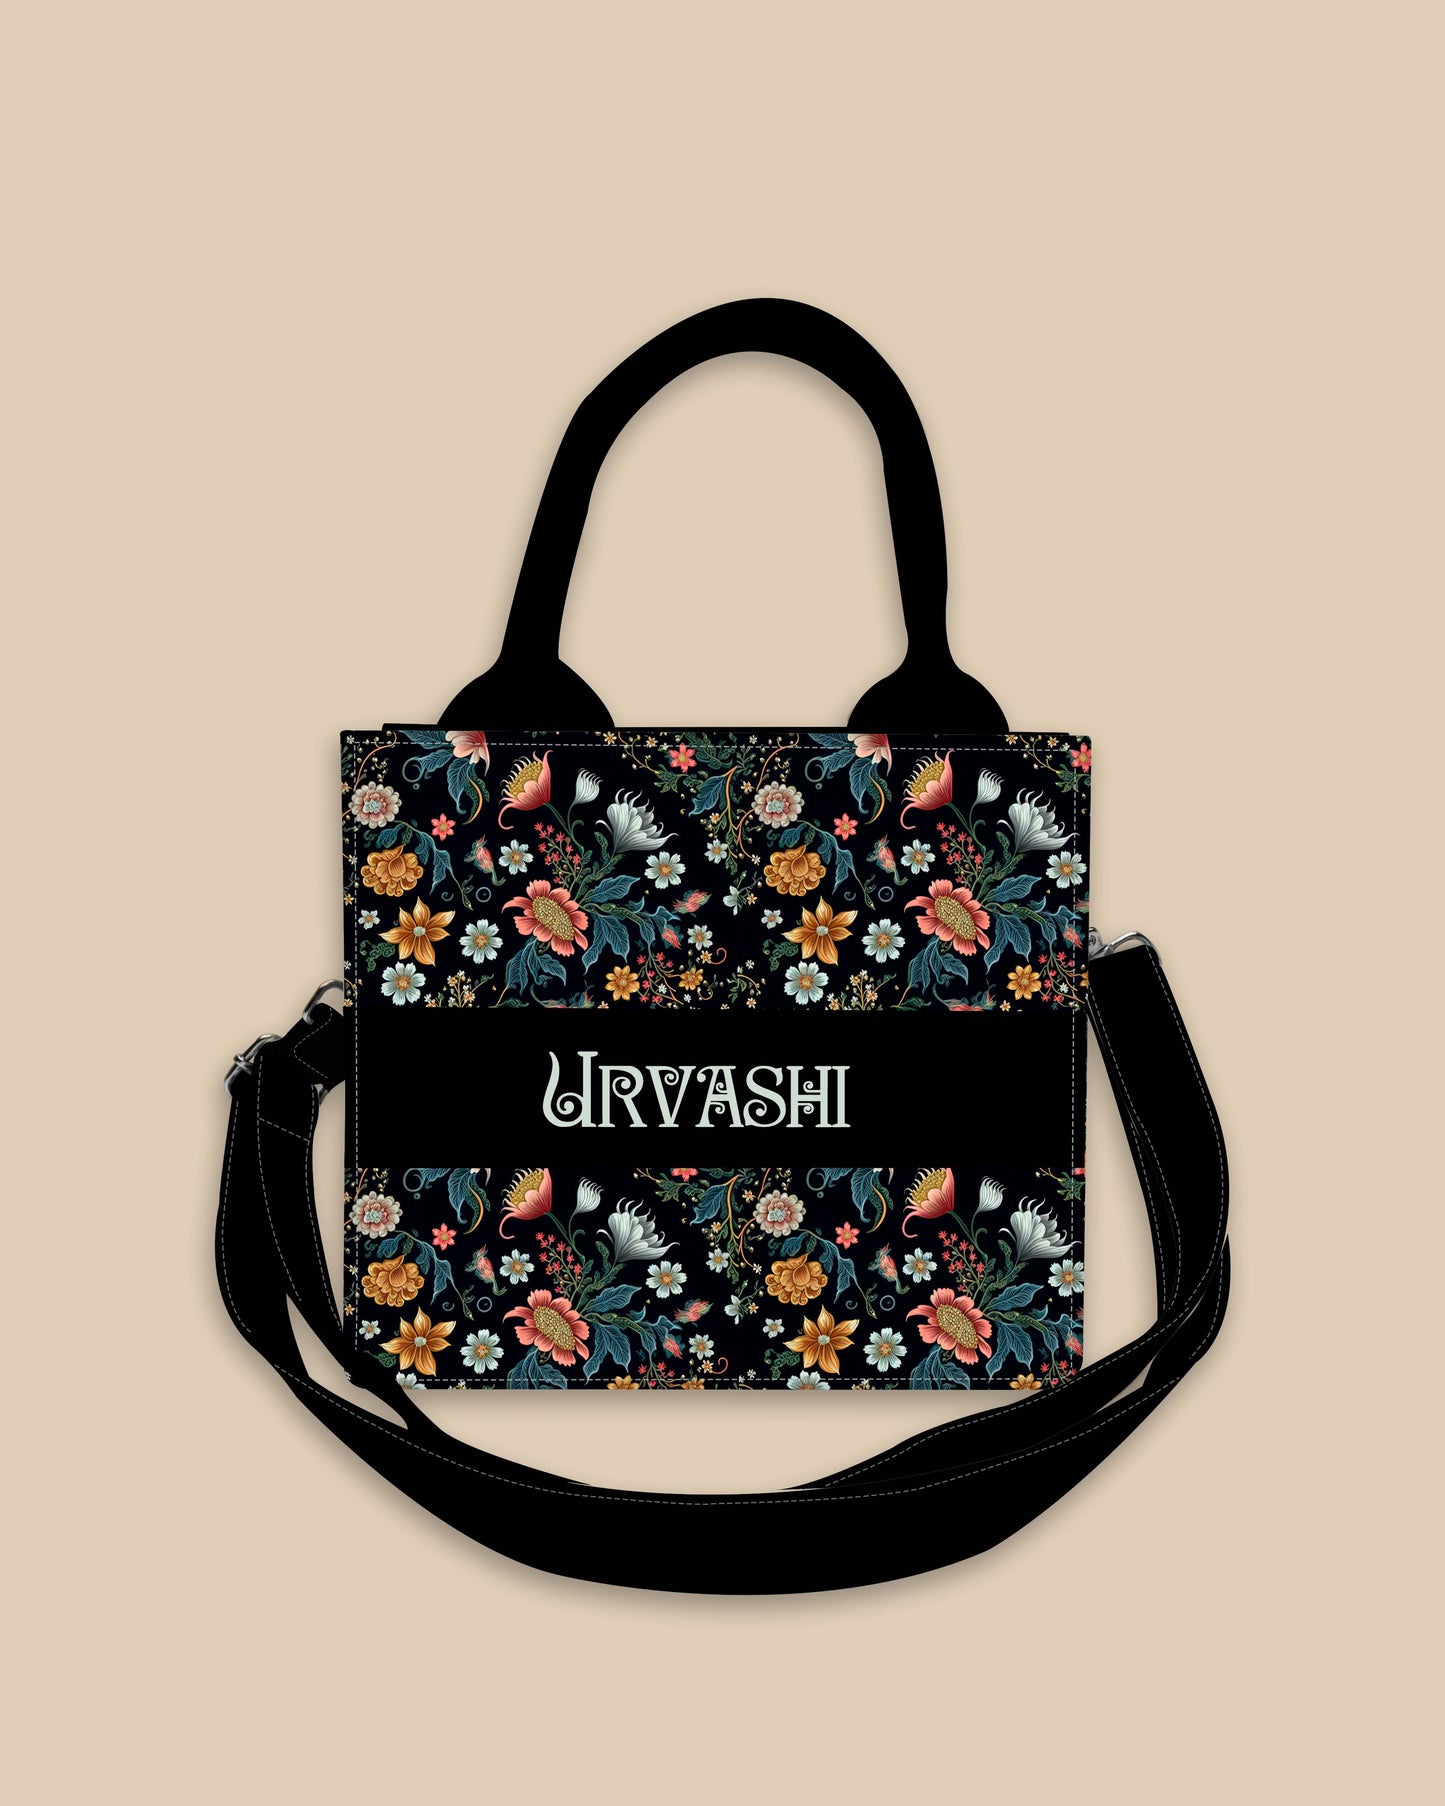 Customized Small Tote Bag Designed With Intricate Floral Pattern And Elegant Flower